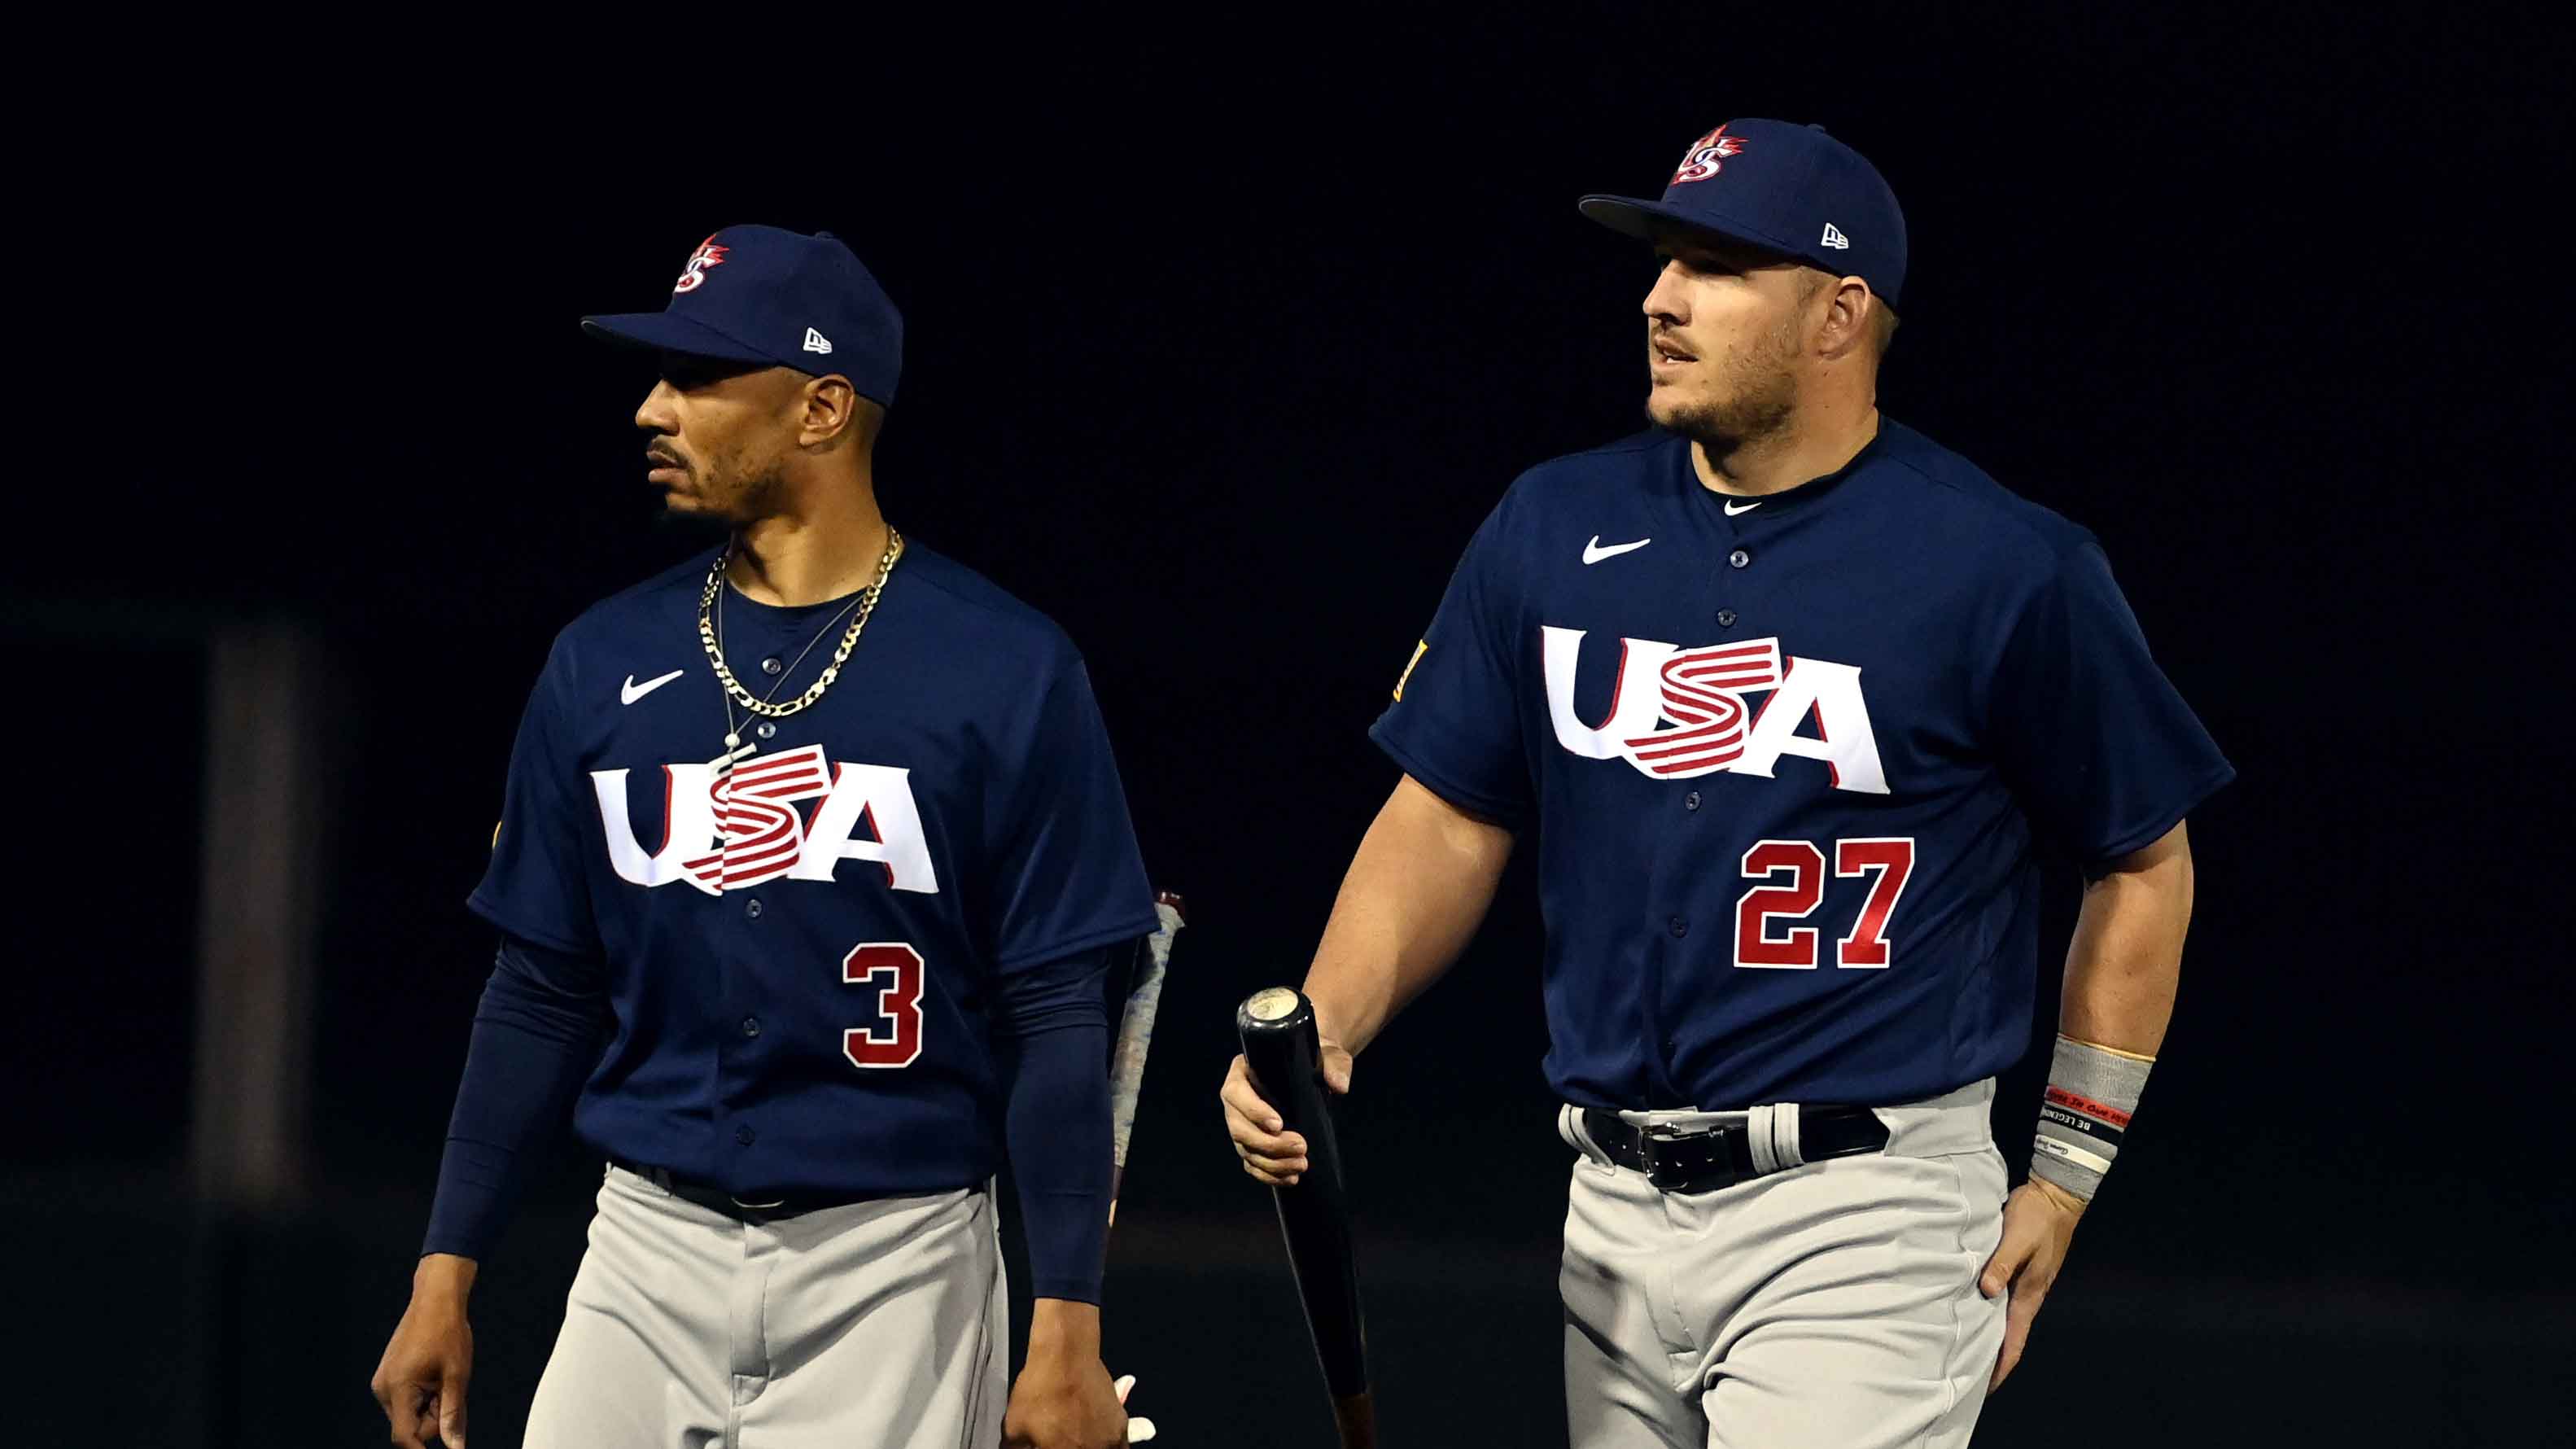 World Baseball Classic 2023: Mike Trout named Team USA's captain